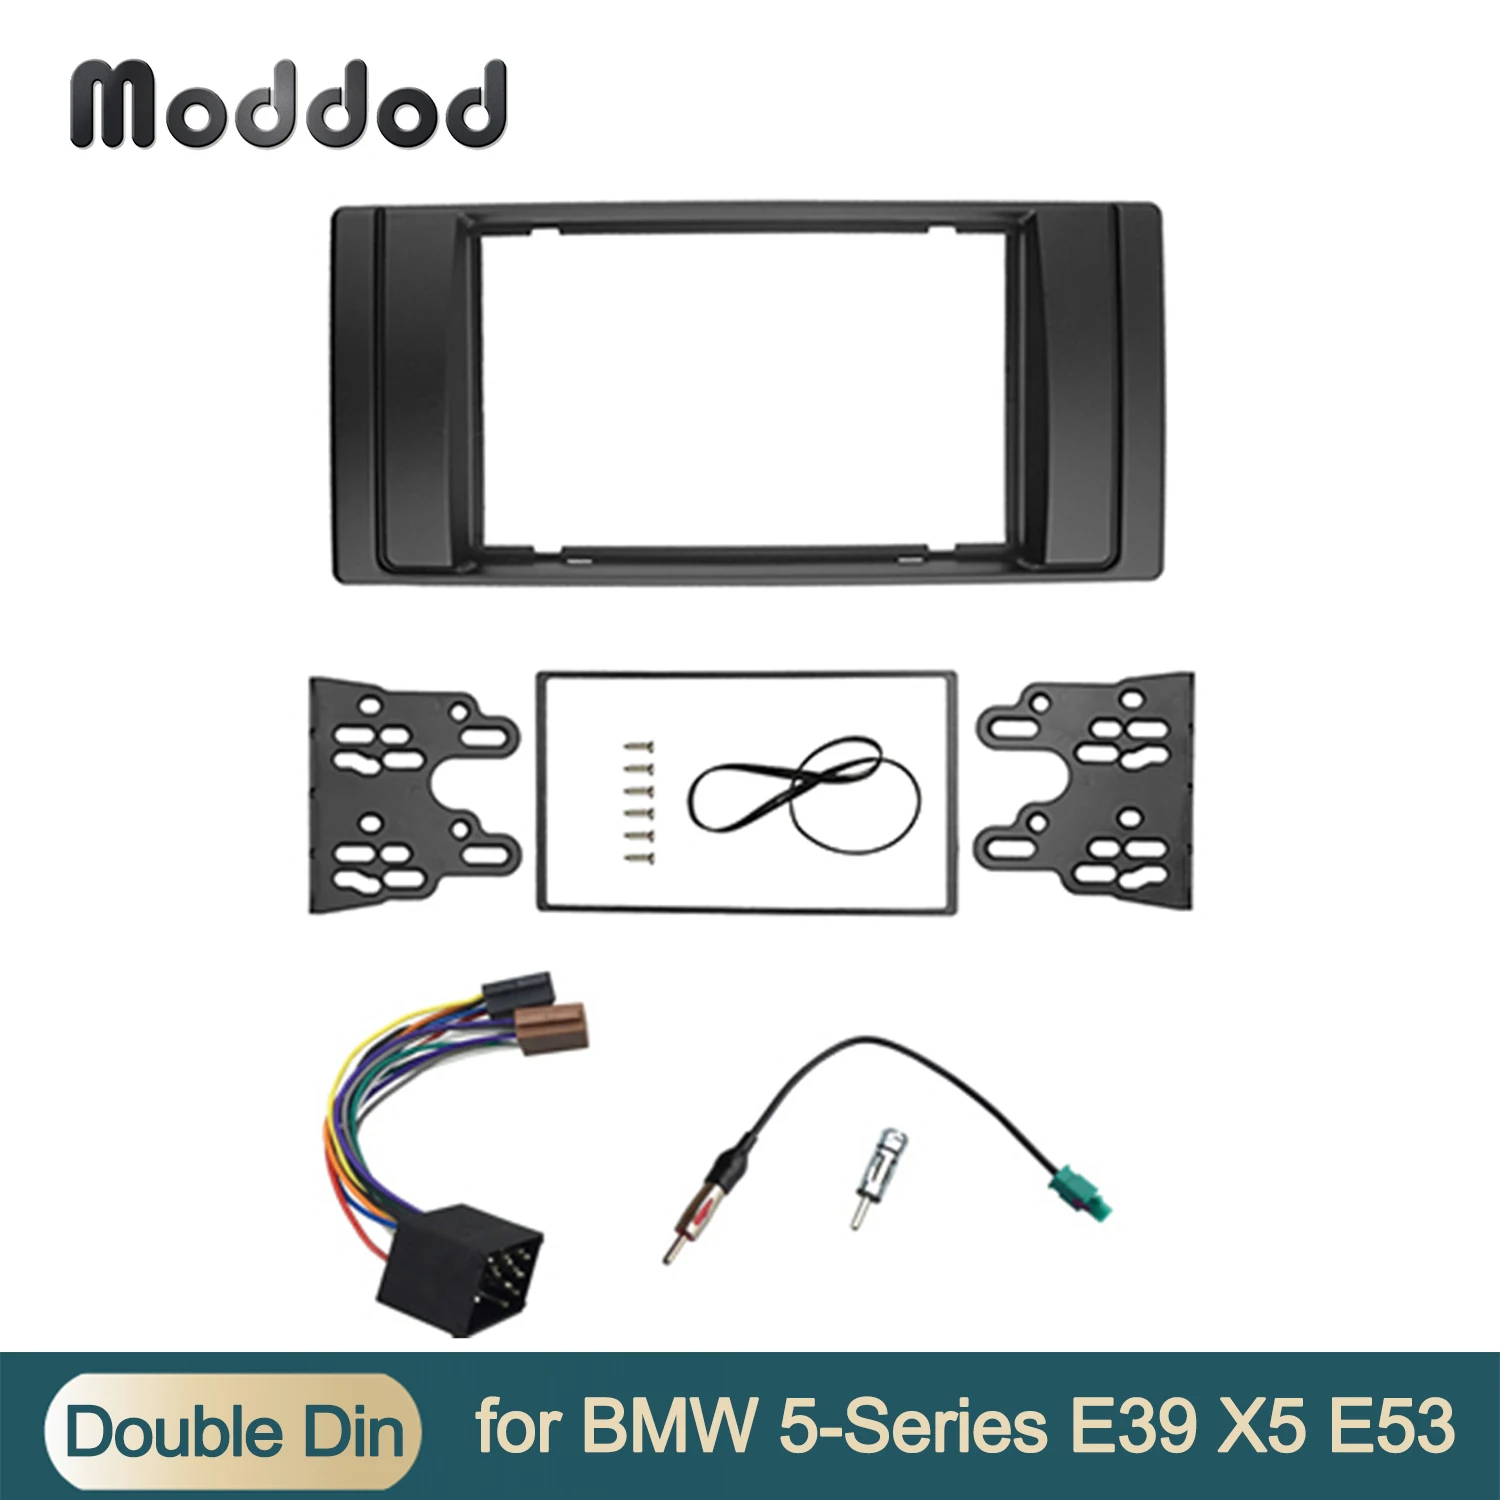 For BMW 5-Series E53 E39 Radio DVD Stereo Panel Dash Double Din Fascia Trim Kit Frame with Wiring Harness Antenna Aerial Adaptor